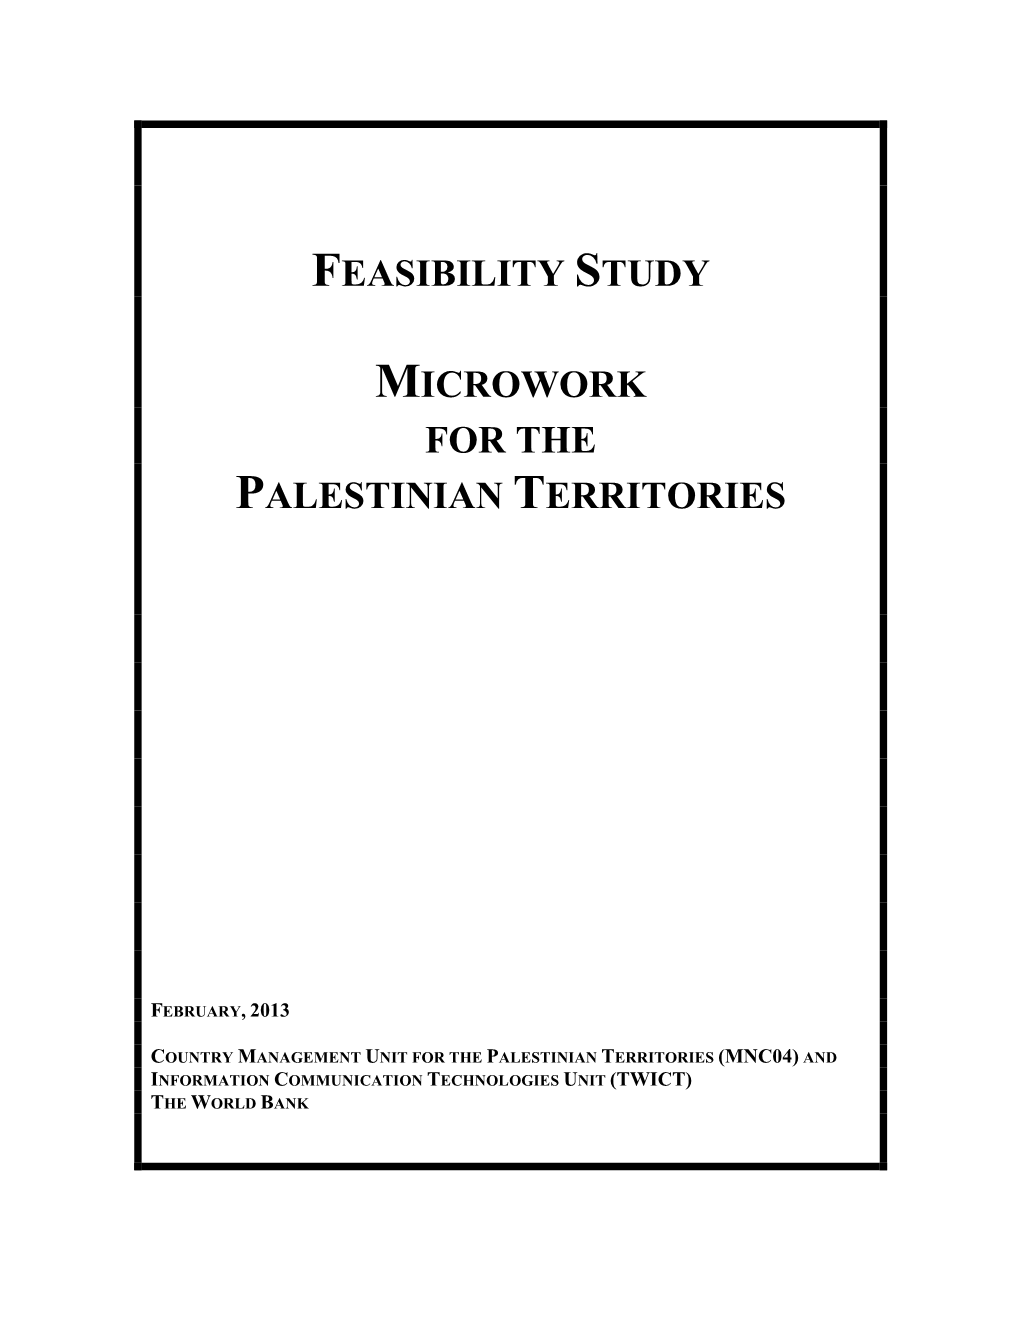 Feasibility Study Microwork for the Palestinian Territories